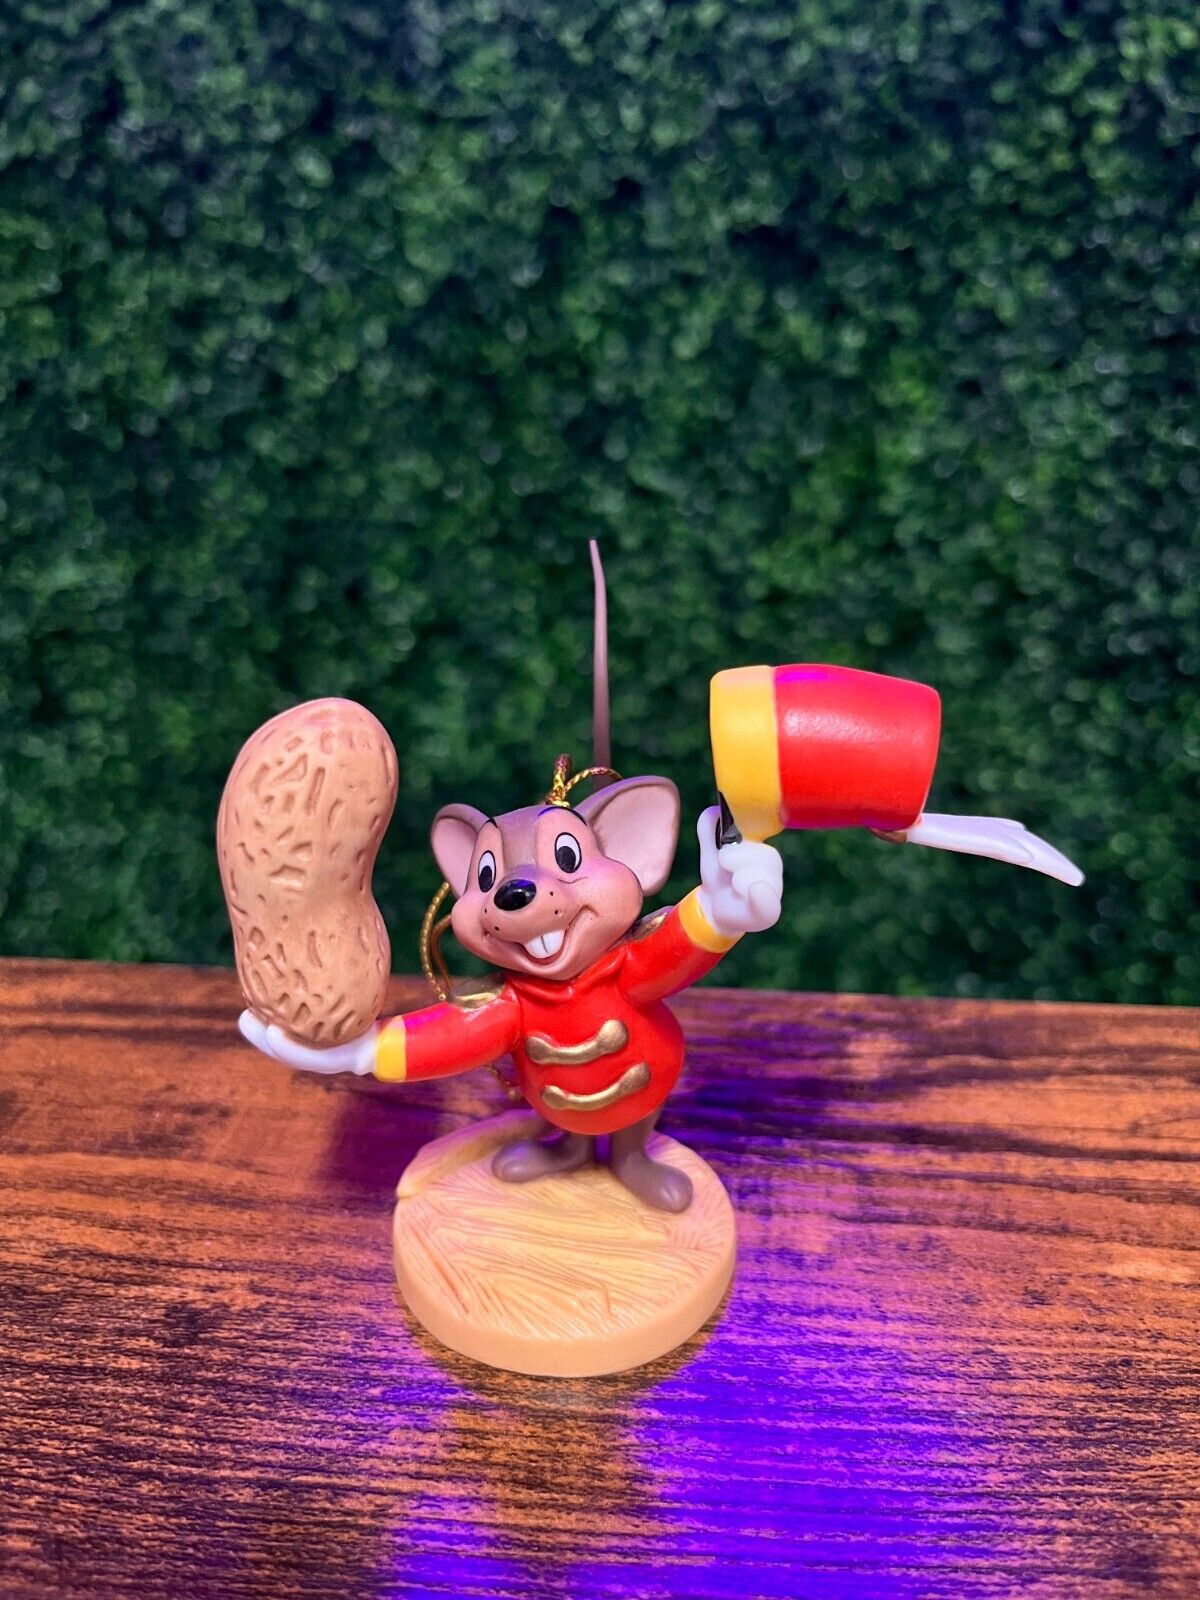 WDCC Friendship Offering Timothy Mouse Disney Dumbo 1998 Ornament no Box or COA